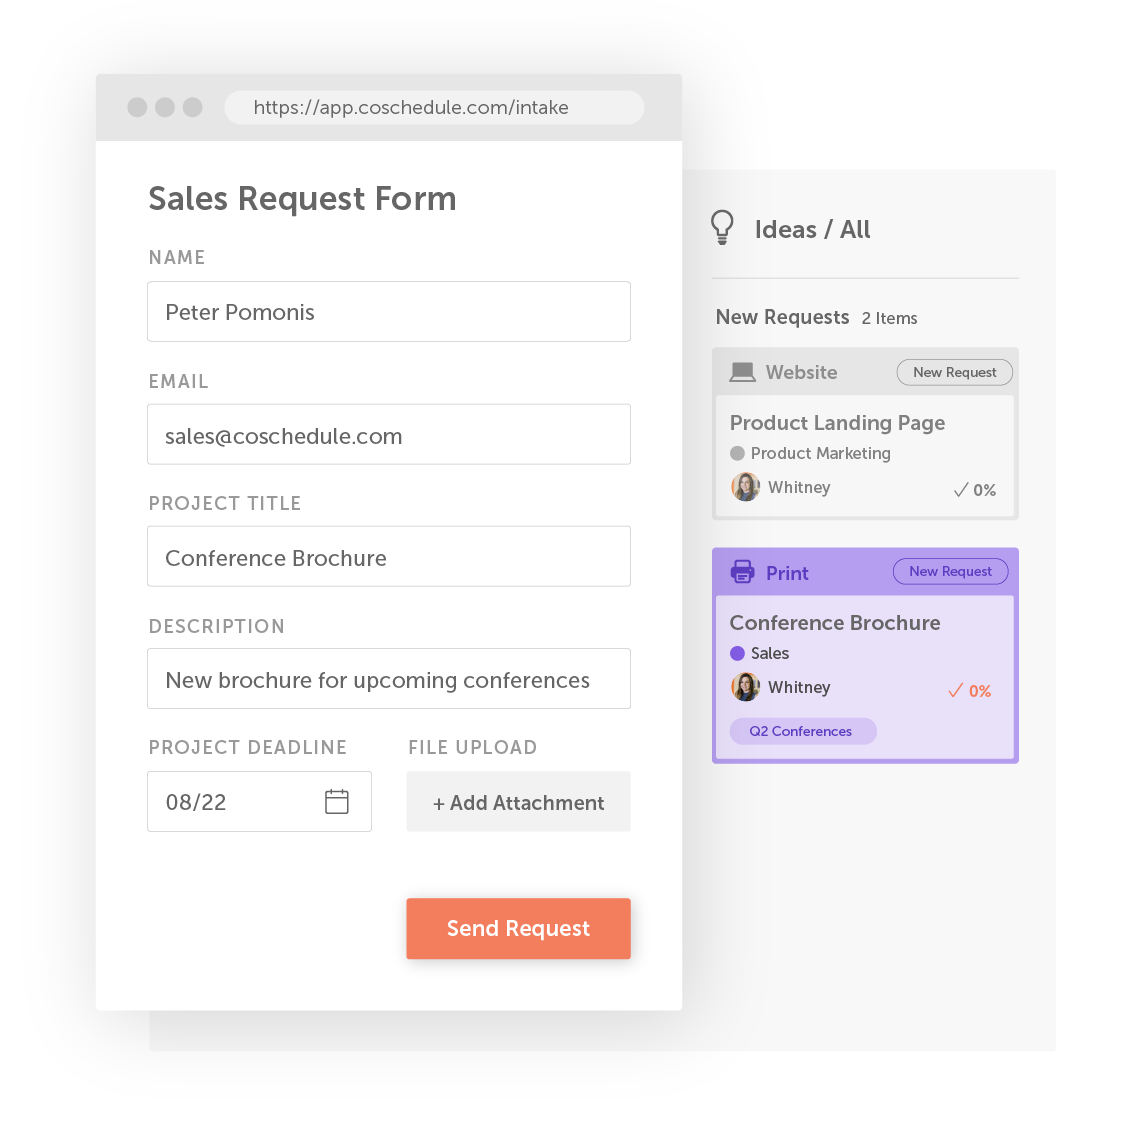 Streamline your project intake process. Create custom, shareable intake forms to gain control over requests. Capture project requirements upon submission to confirm project specifications & complete work faster.